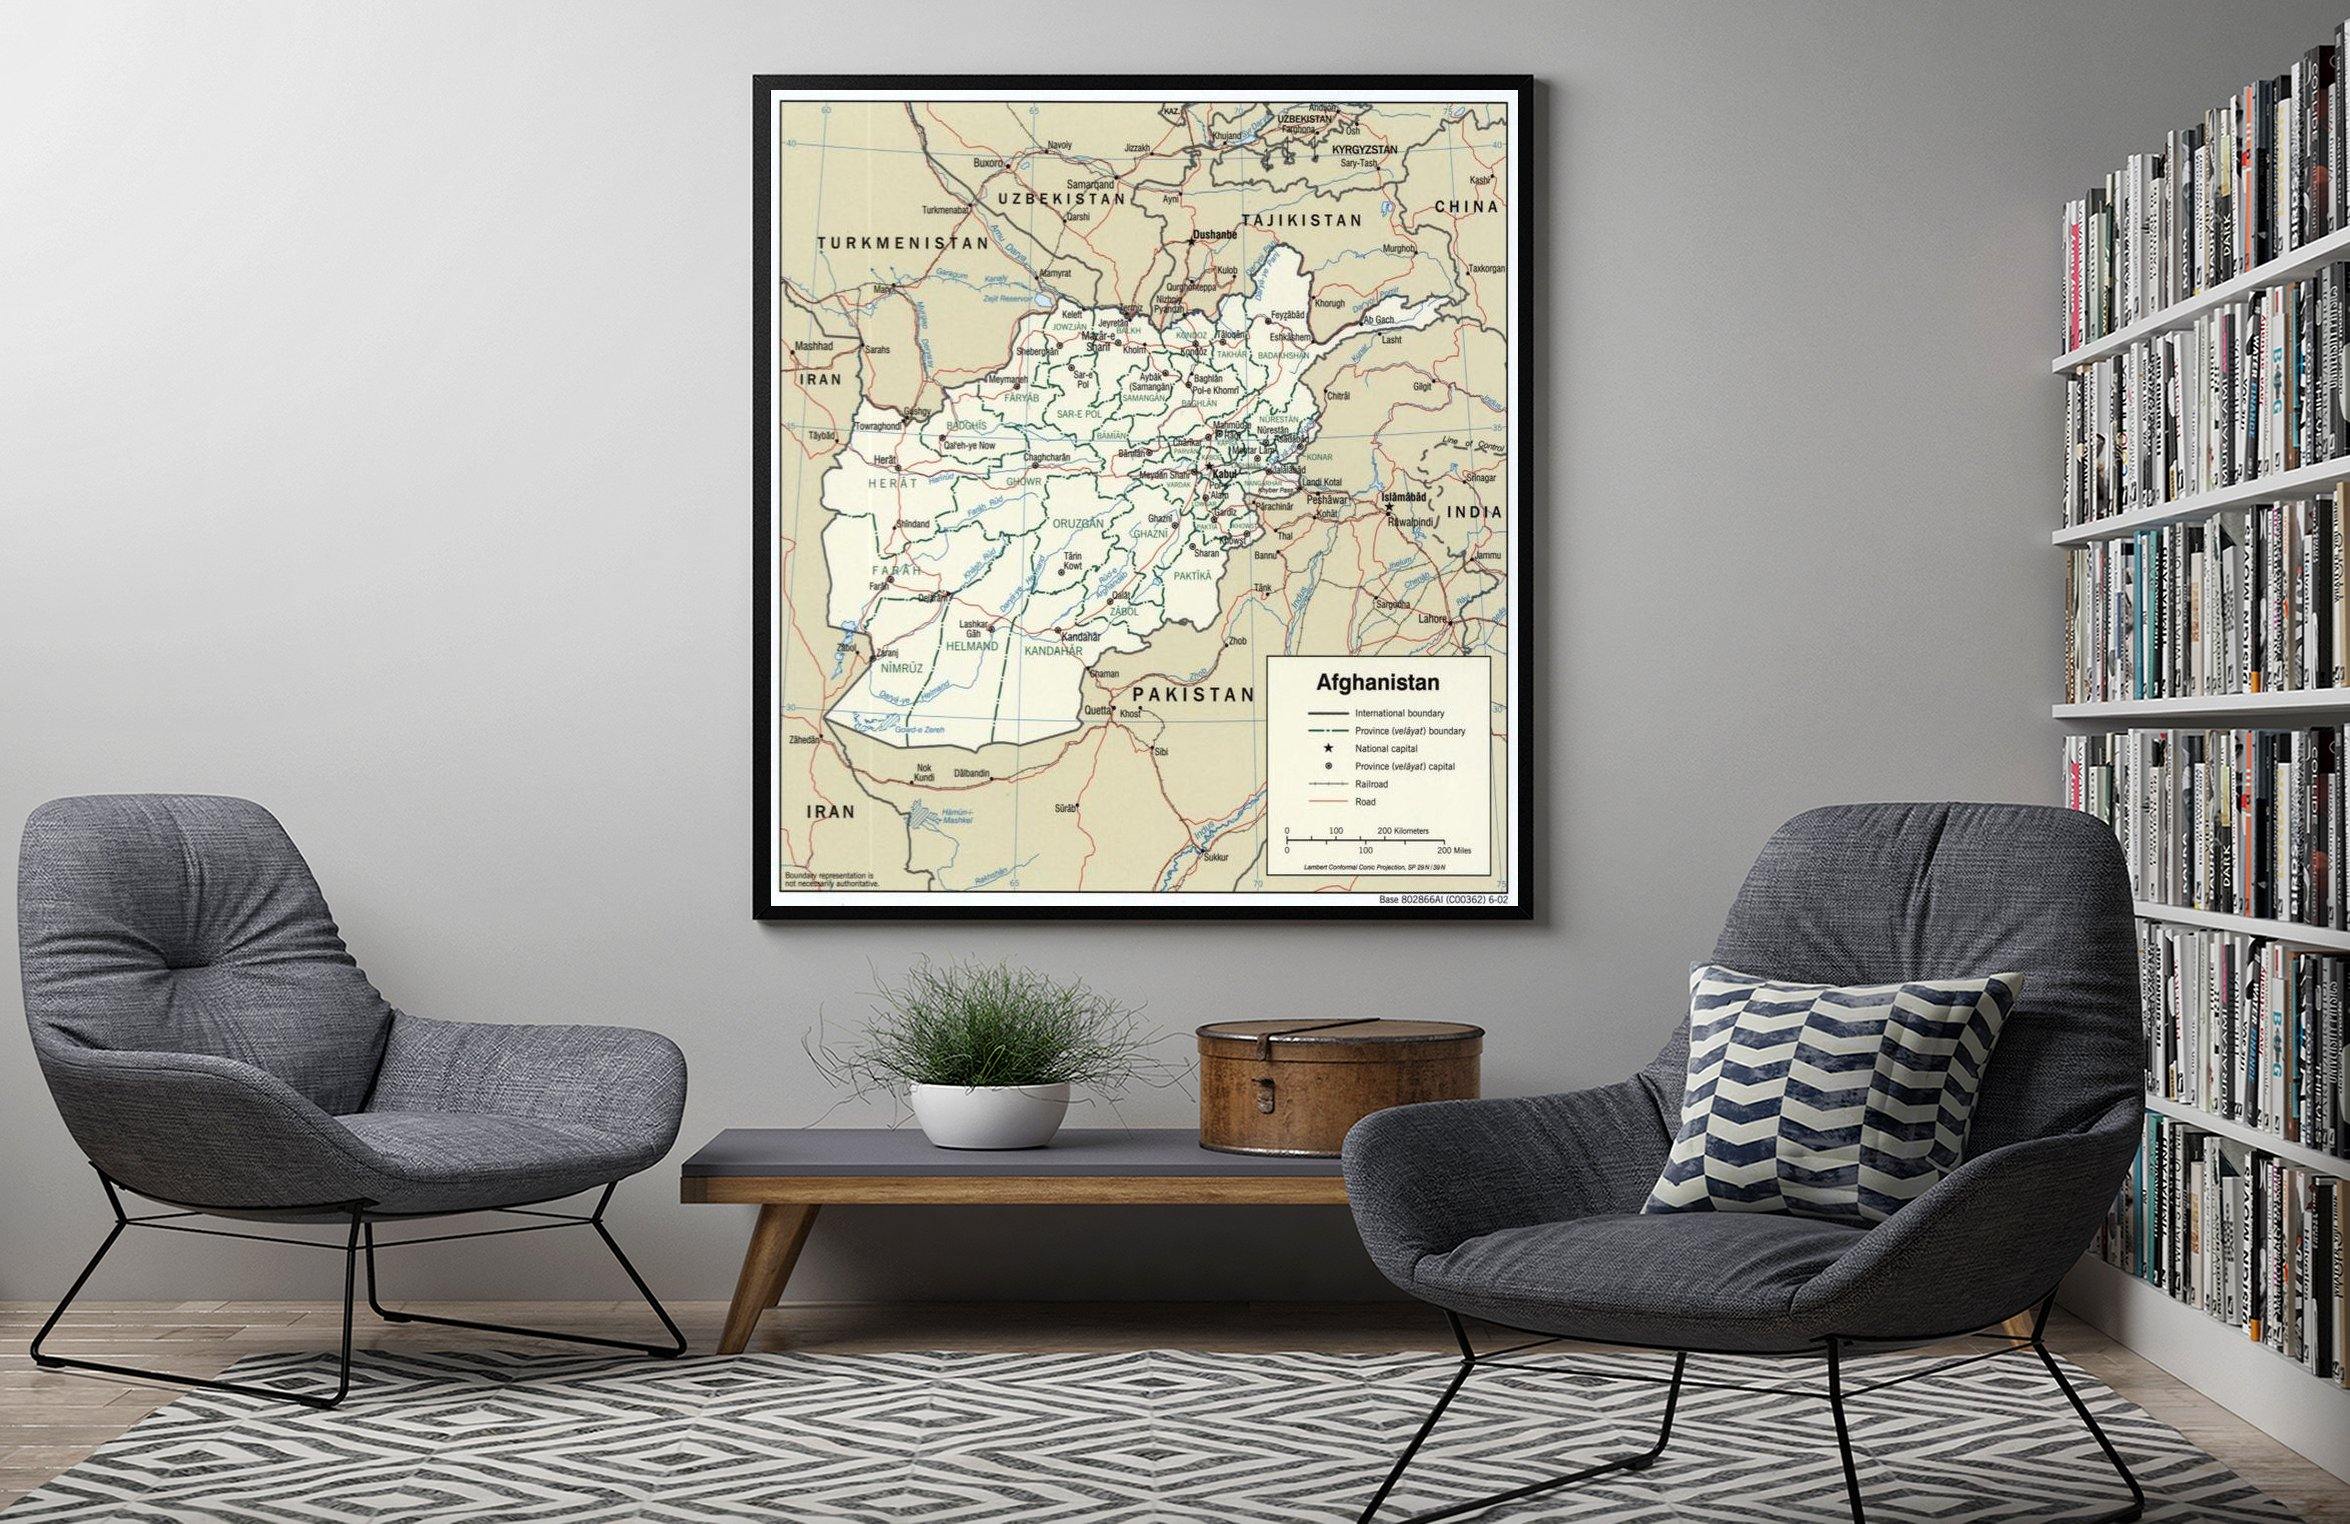 2002 Map| Afghanistan| Afghanistan Map Size: 22 inches x 24 inches |Fi - New York Map Company